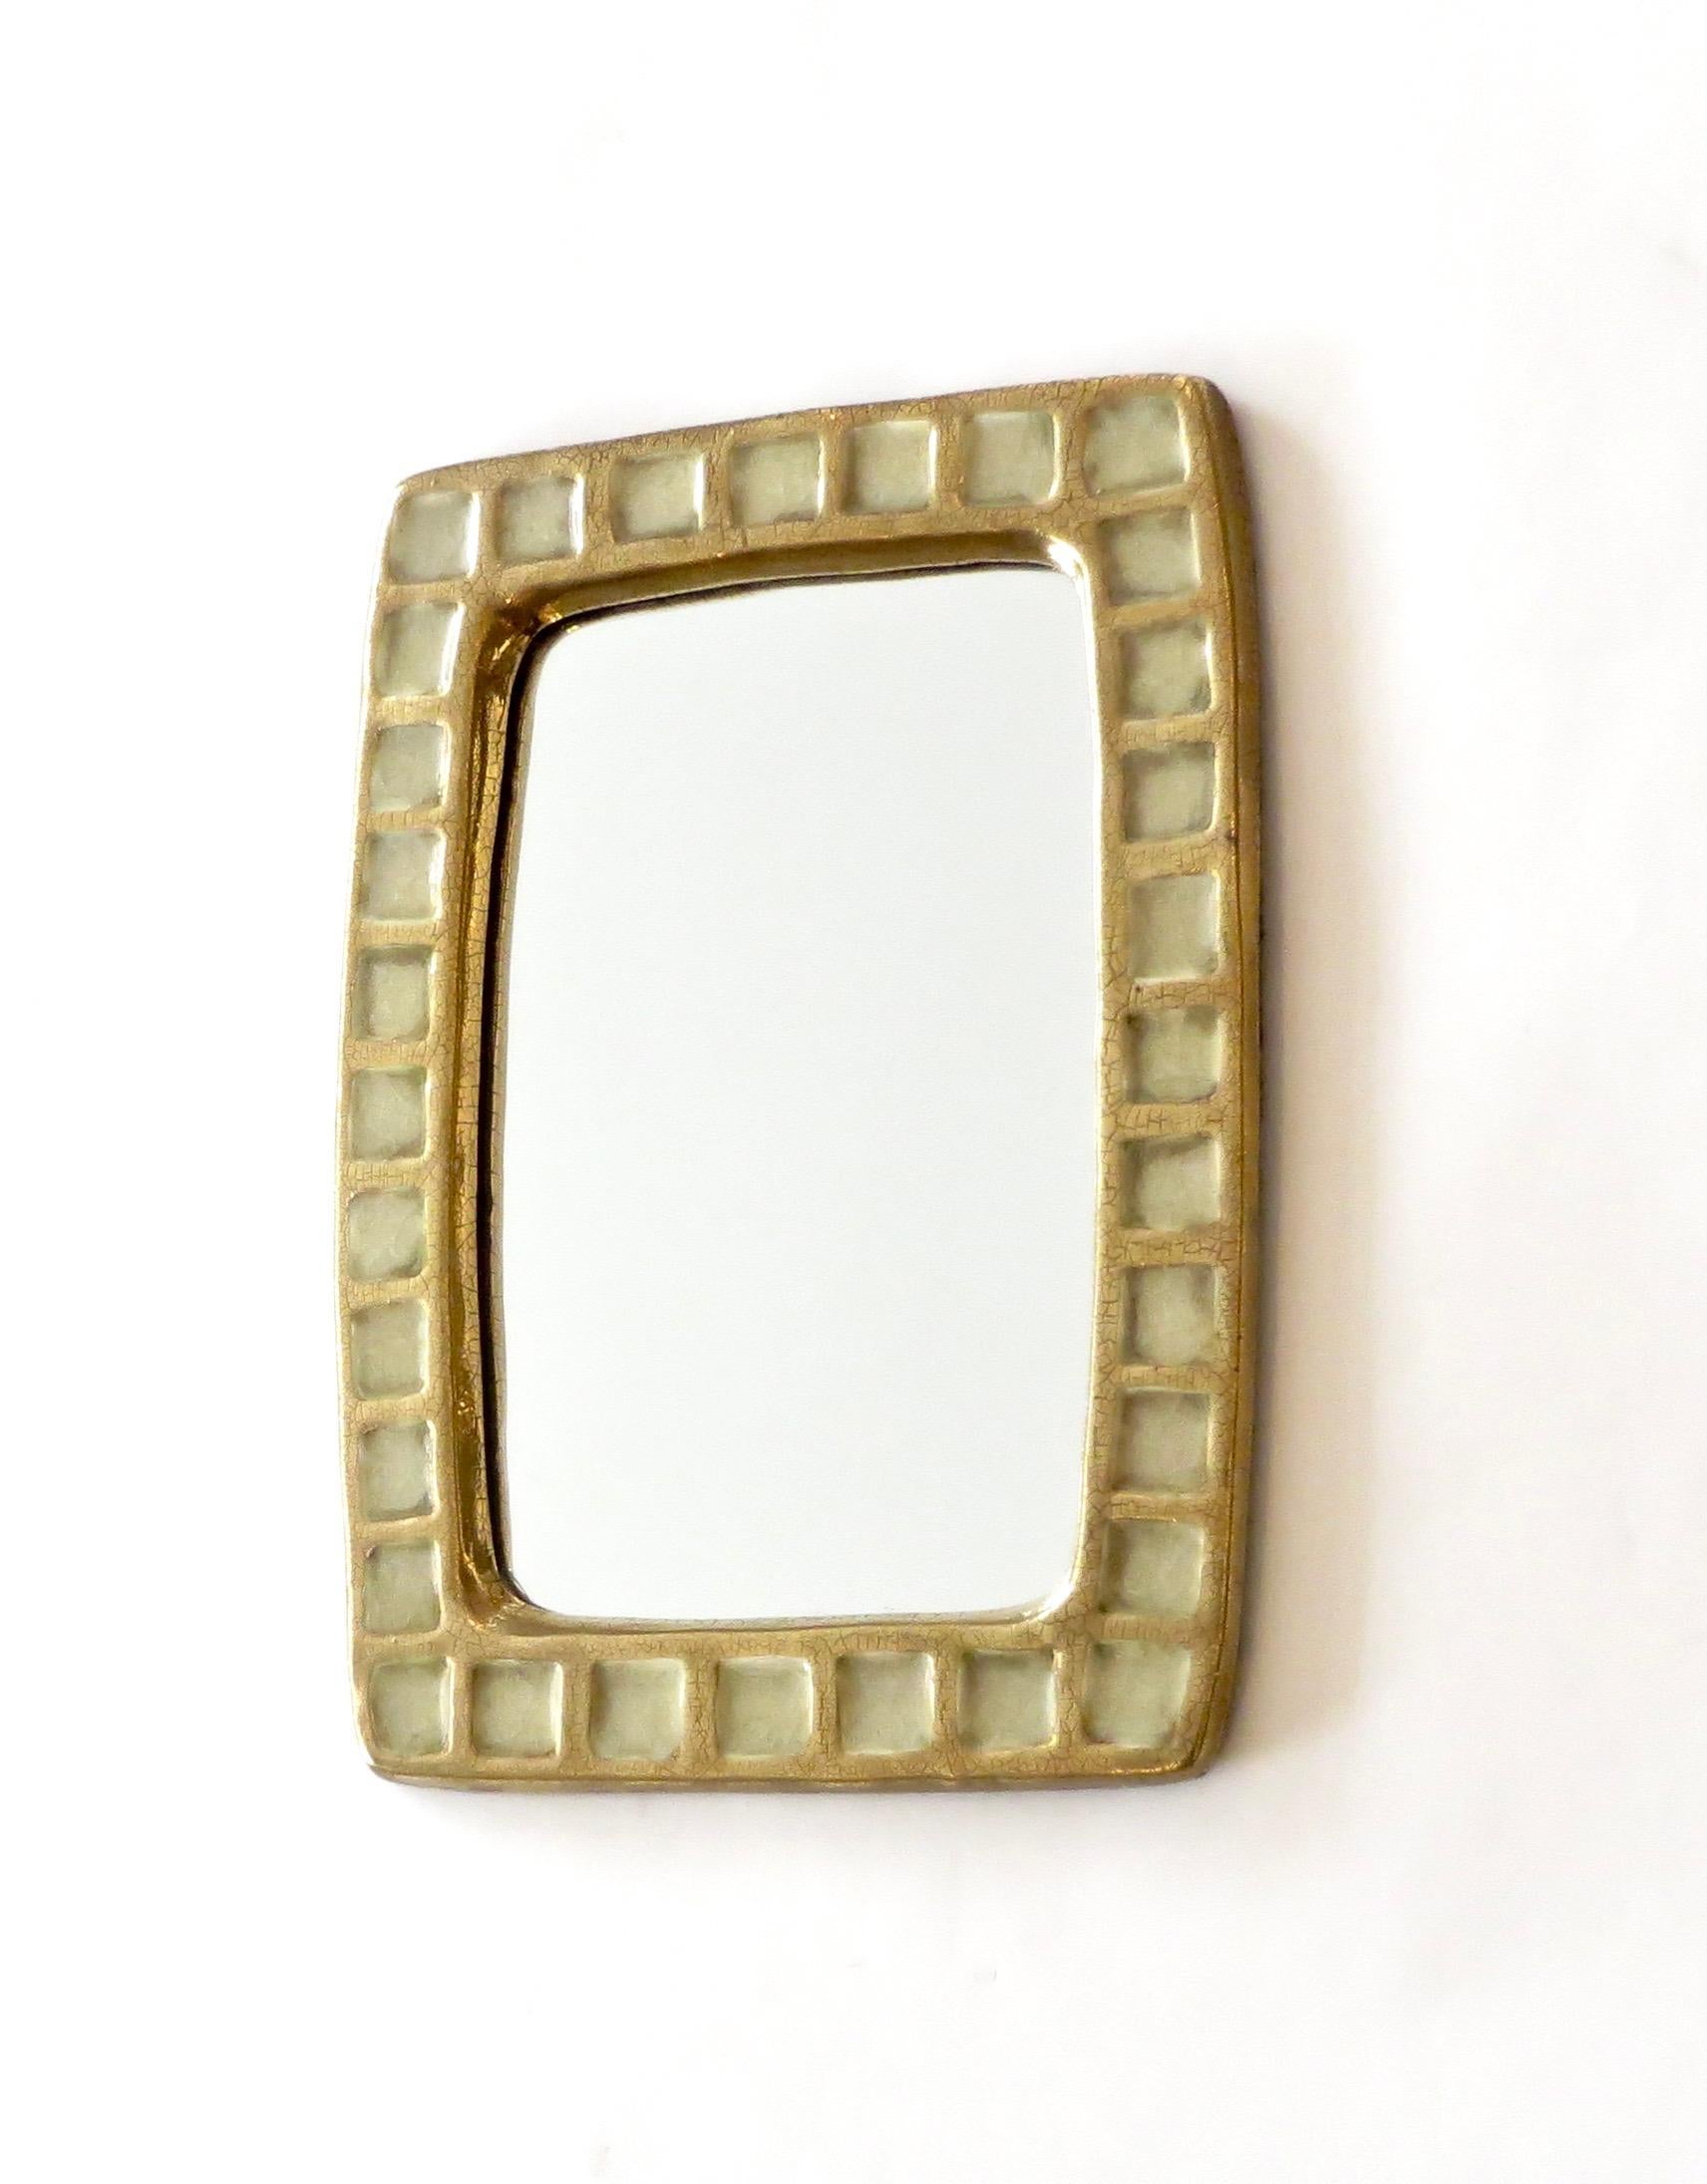 A mirror created by Mithé Espelt, circa 1960, in France. The mirror is composed of tiled fused glass within a gold crackle glazed ceramic frame.
 Very fine original condition.
 A similar mirror is pictured on p 111 in the book Mithe Espelt, The